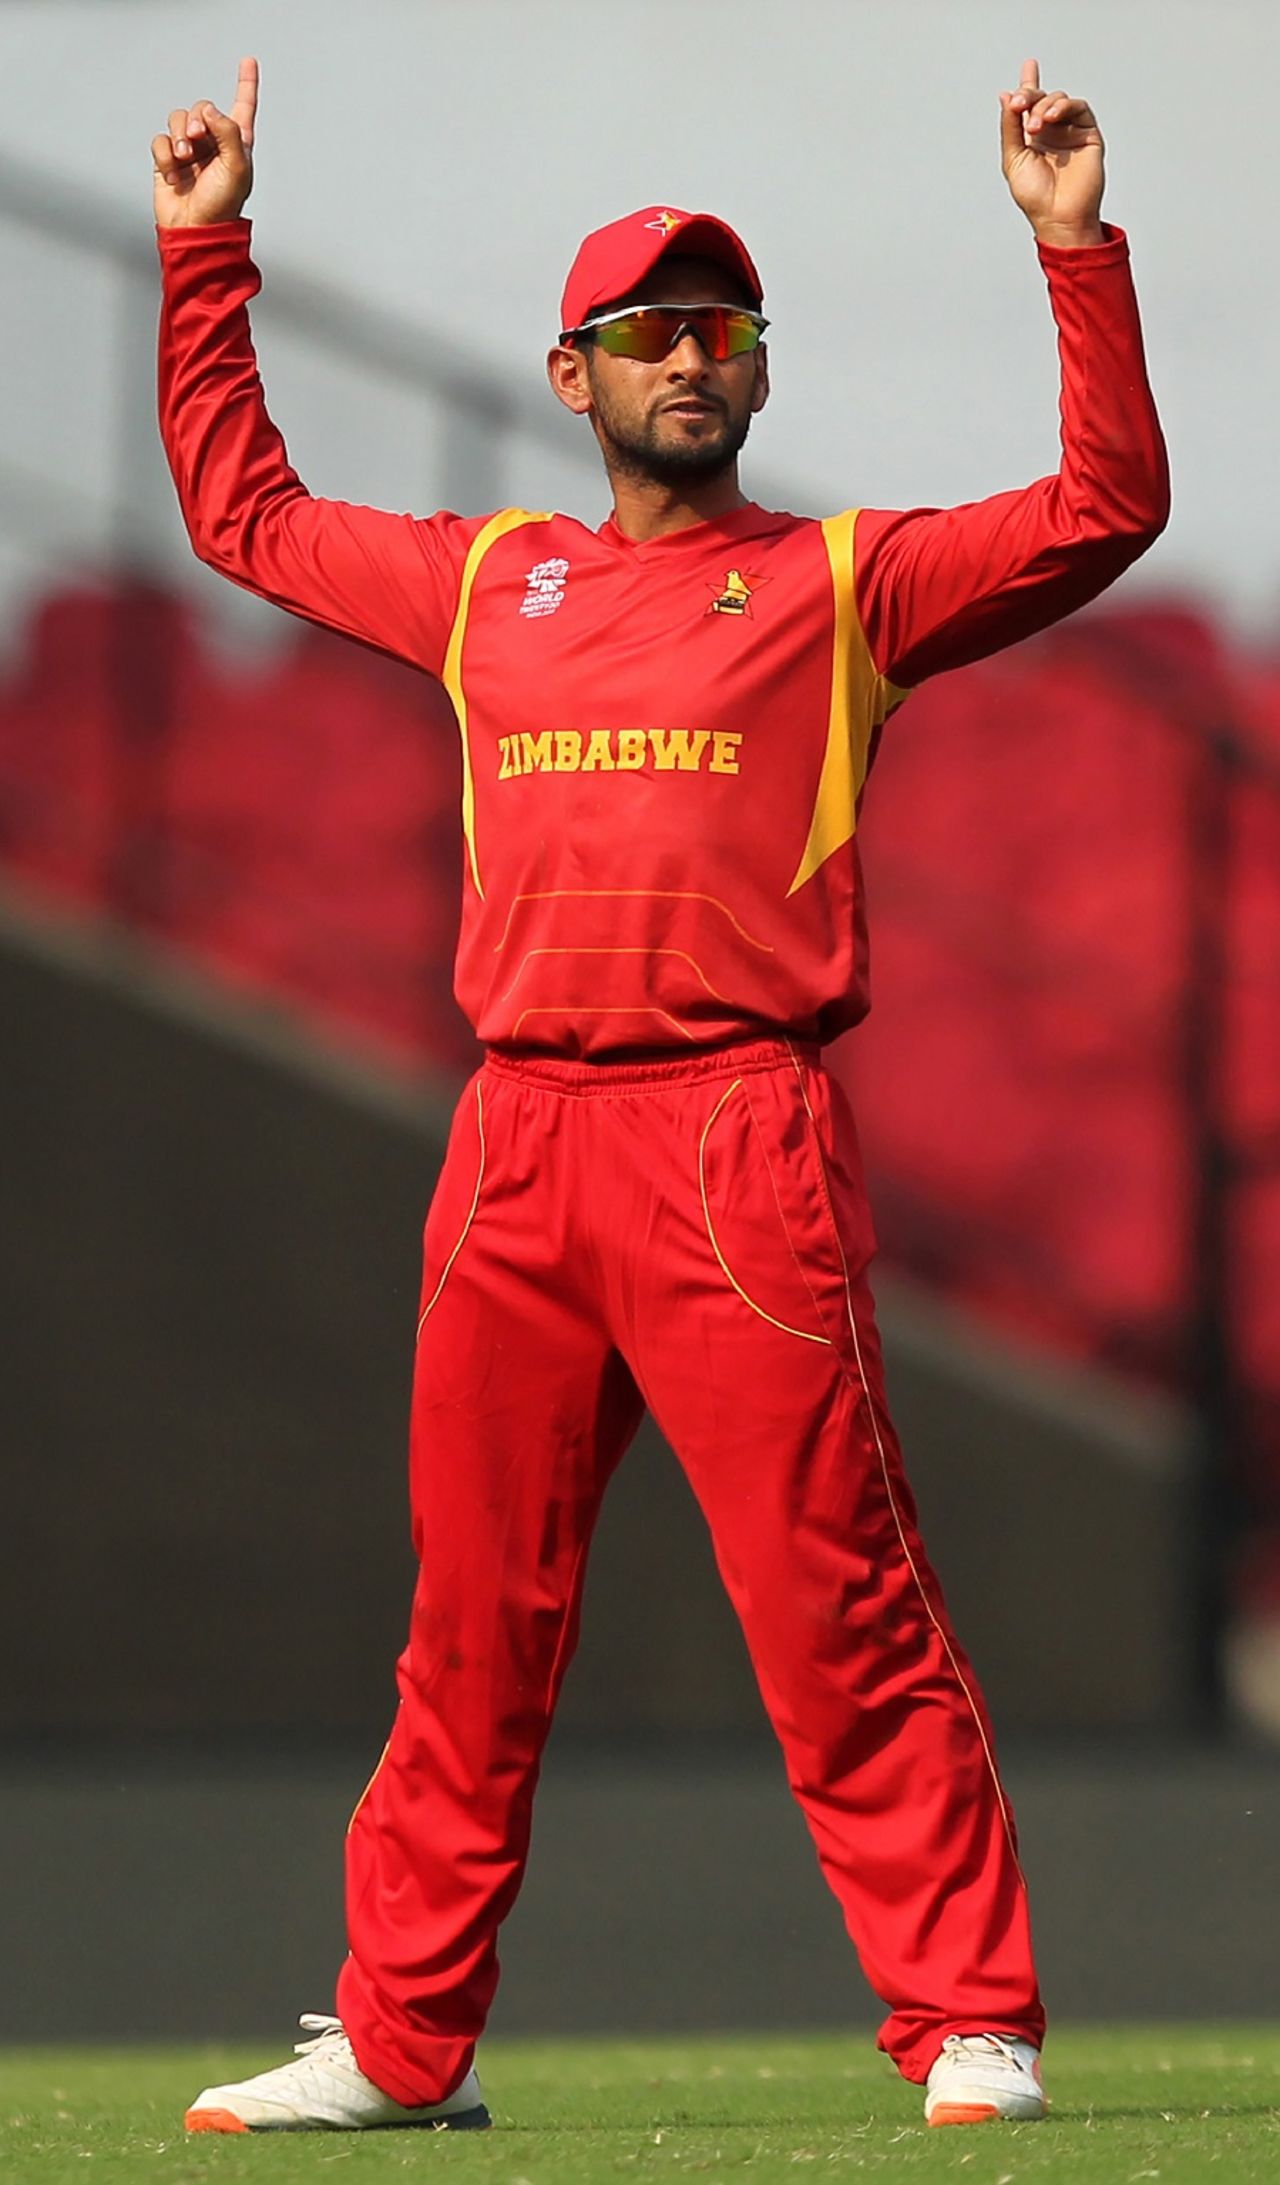 Sikandar Raza took two catches, Afghanistan v Zimbabwe, World T20 qualifiers, Group B, Nagpur, March 12, 2016